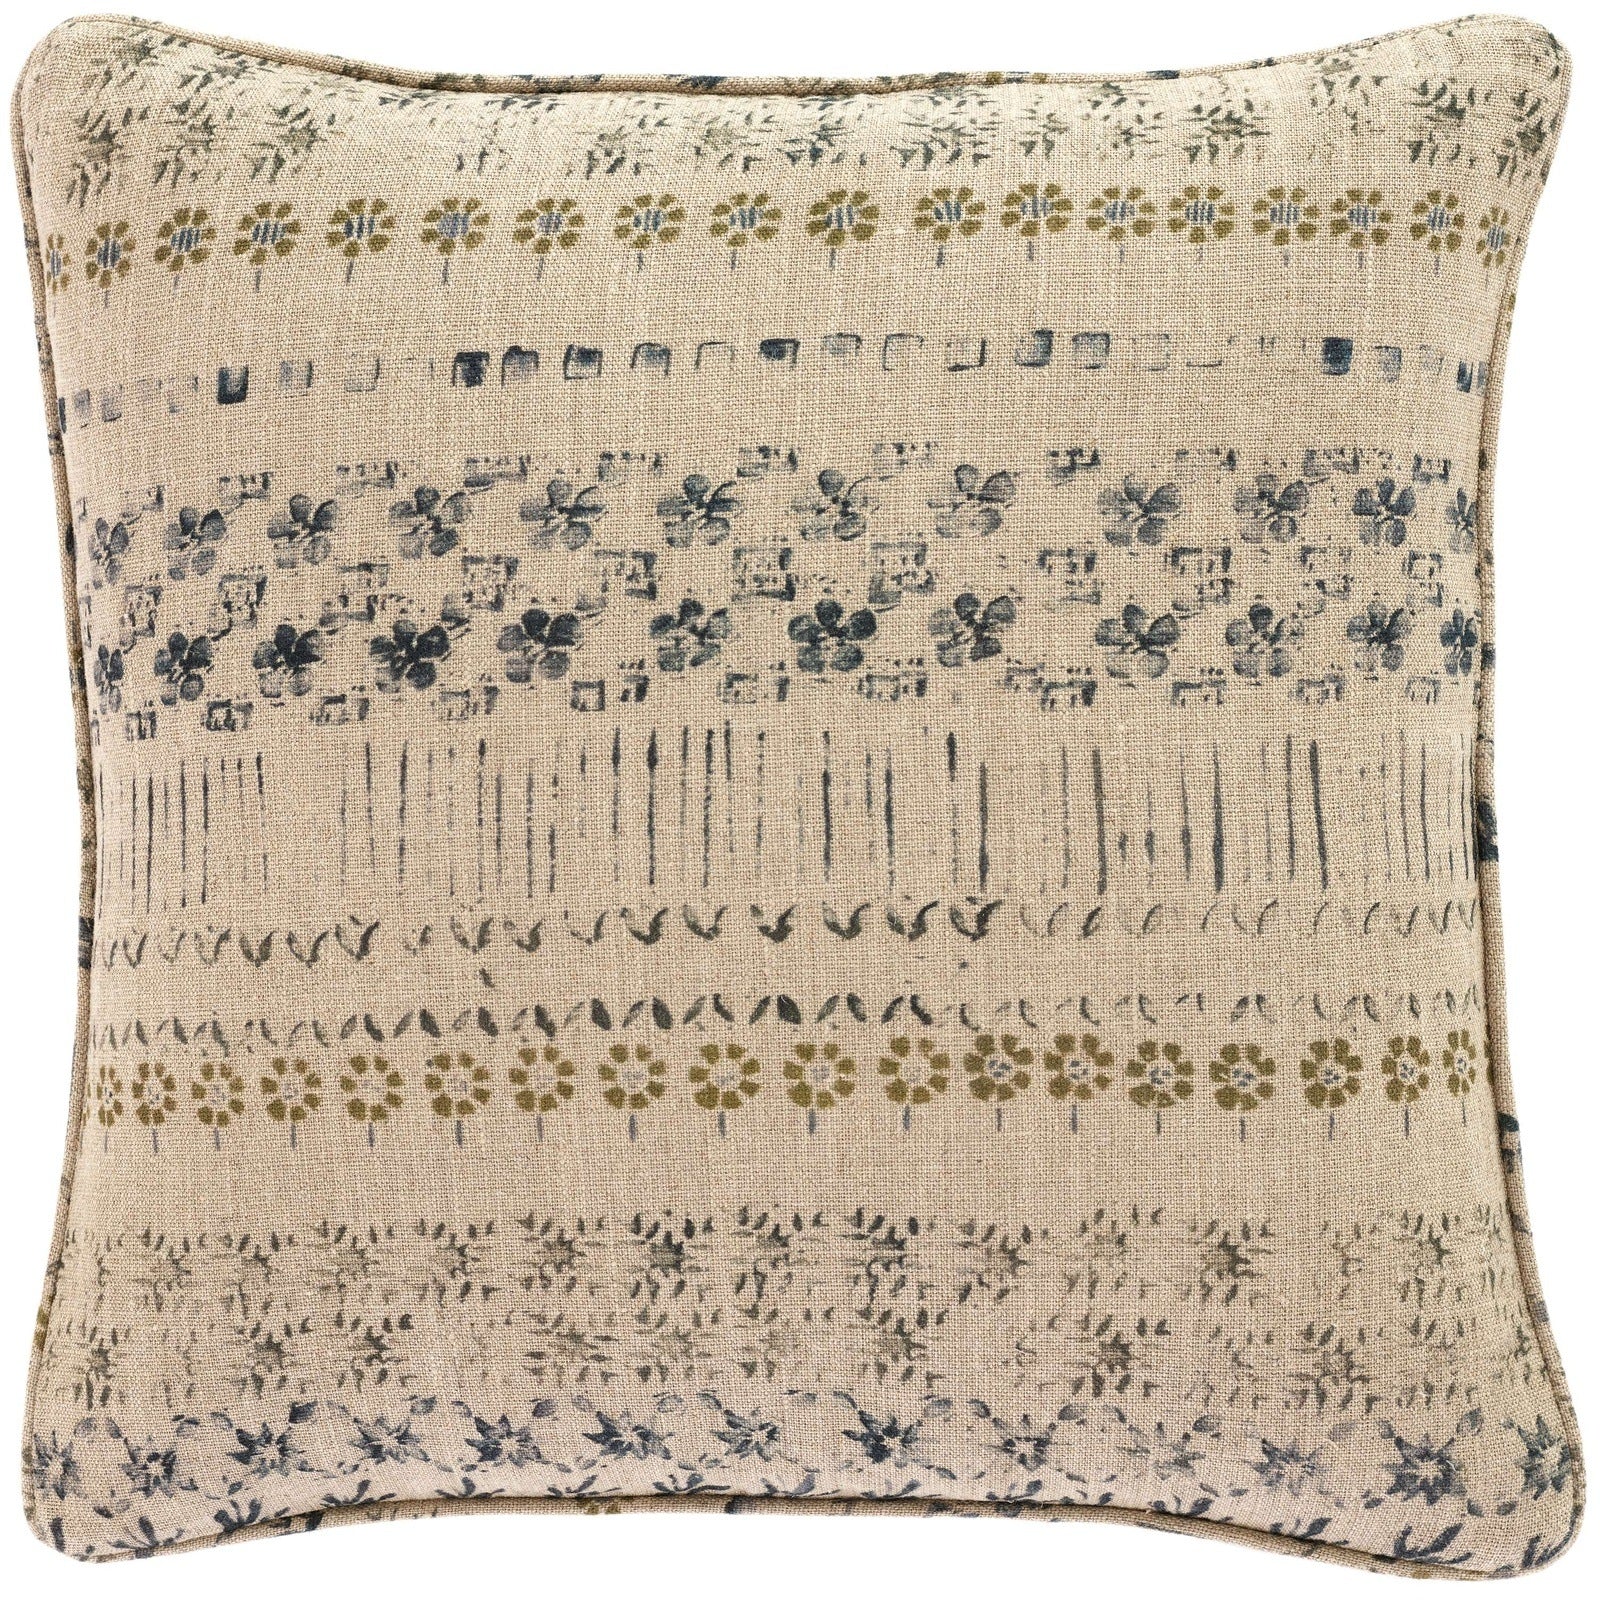 Pine Cone Hill Down Alternative Indoor/Outdoor Decorative Pillow Inse